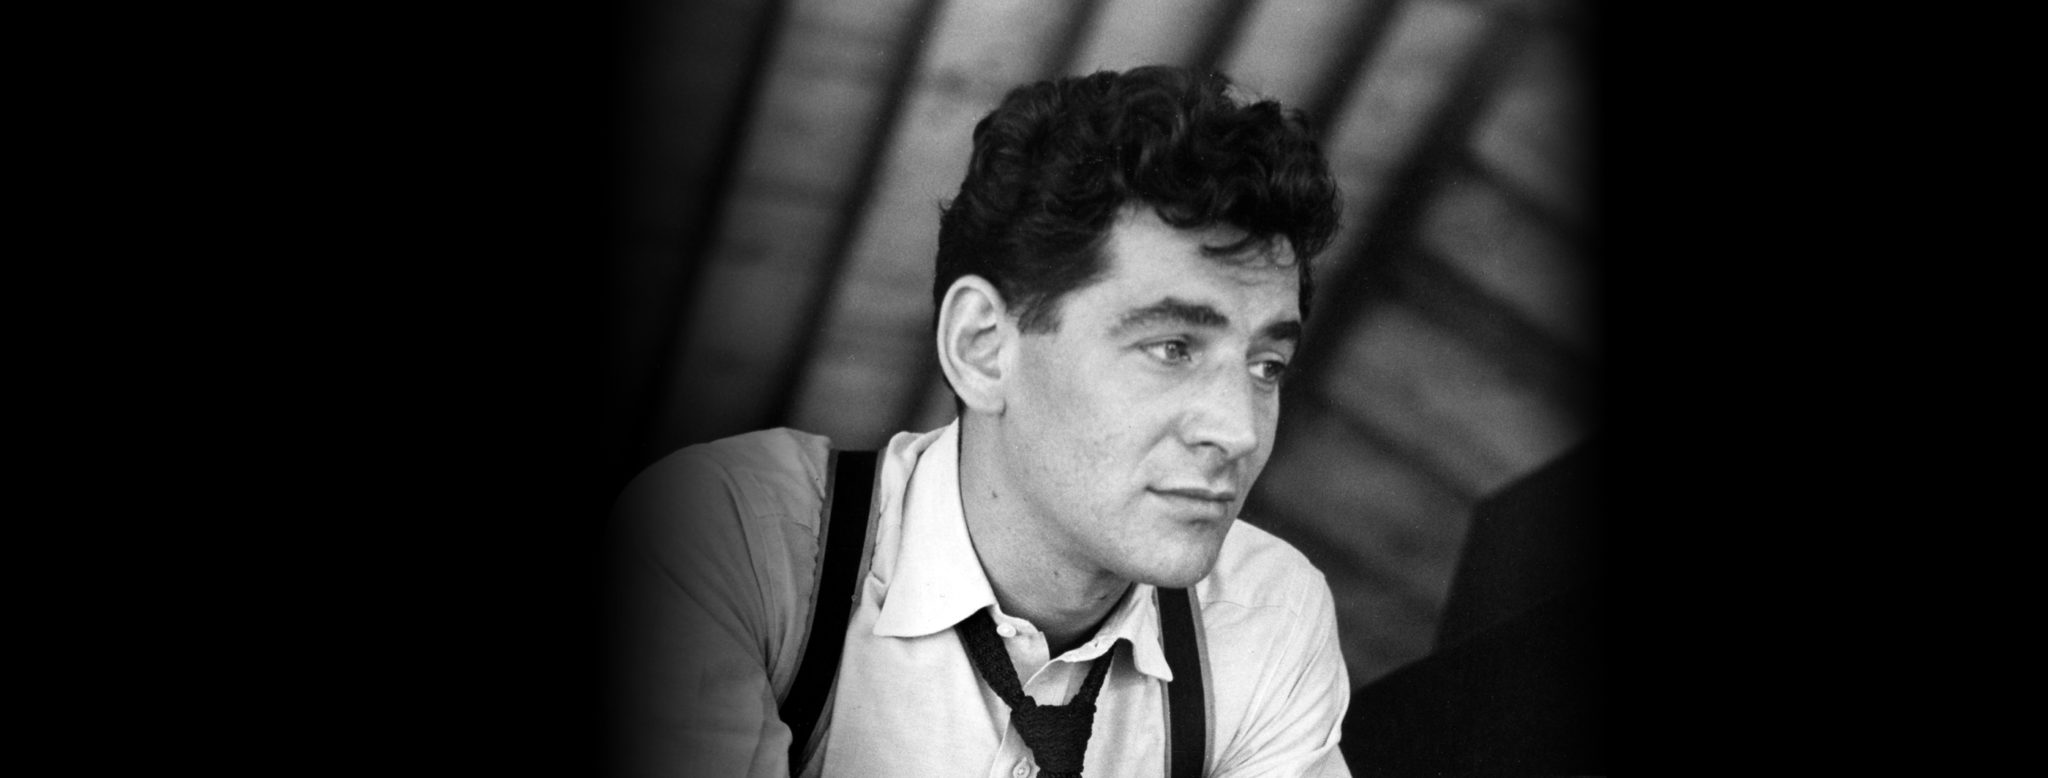 Leonard Bernstein. (Copyright: Ruth Orkin Photo Archive. Used by permission, courtesy of Mary Engel. All rights reserved.)